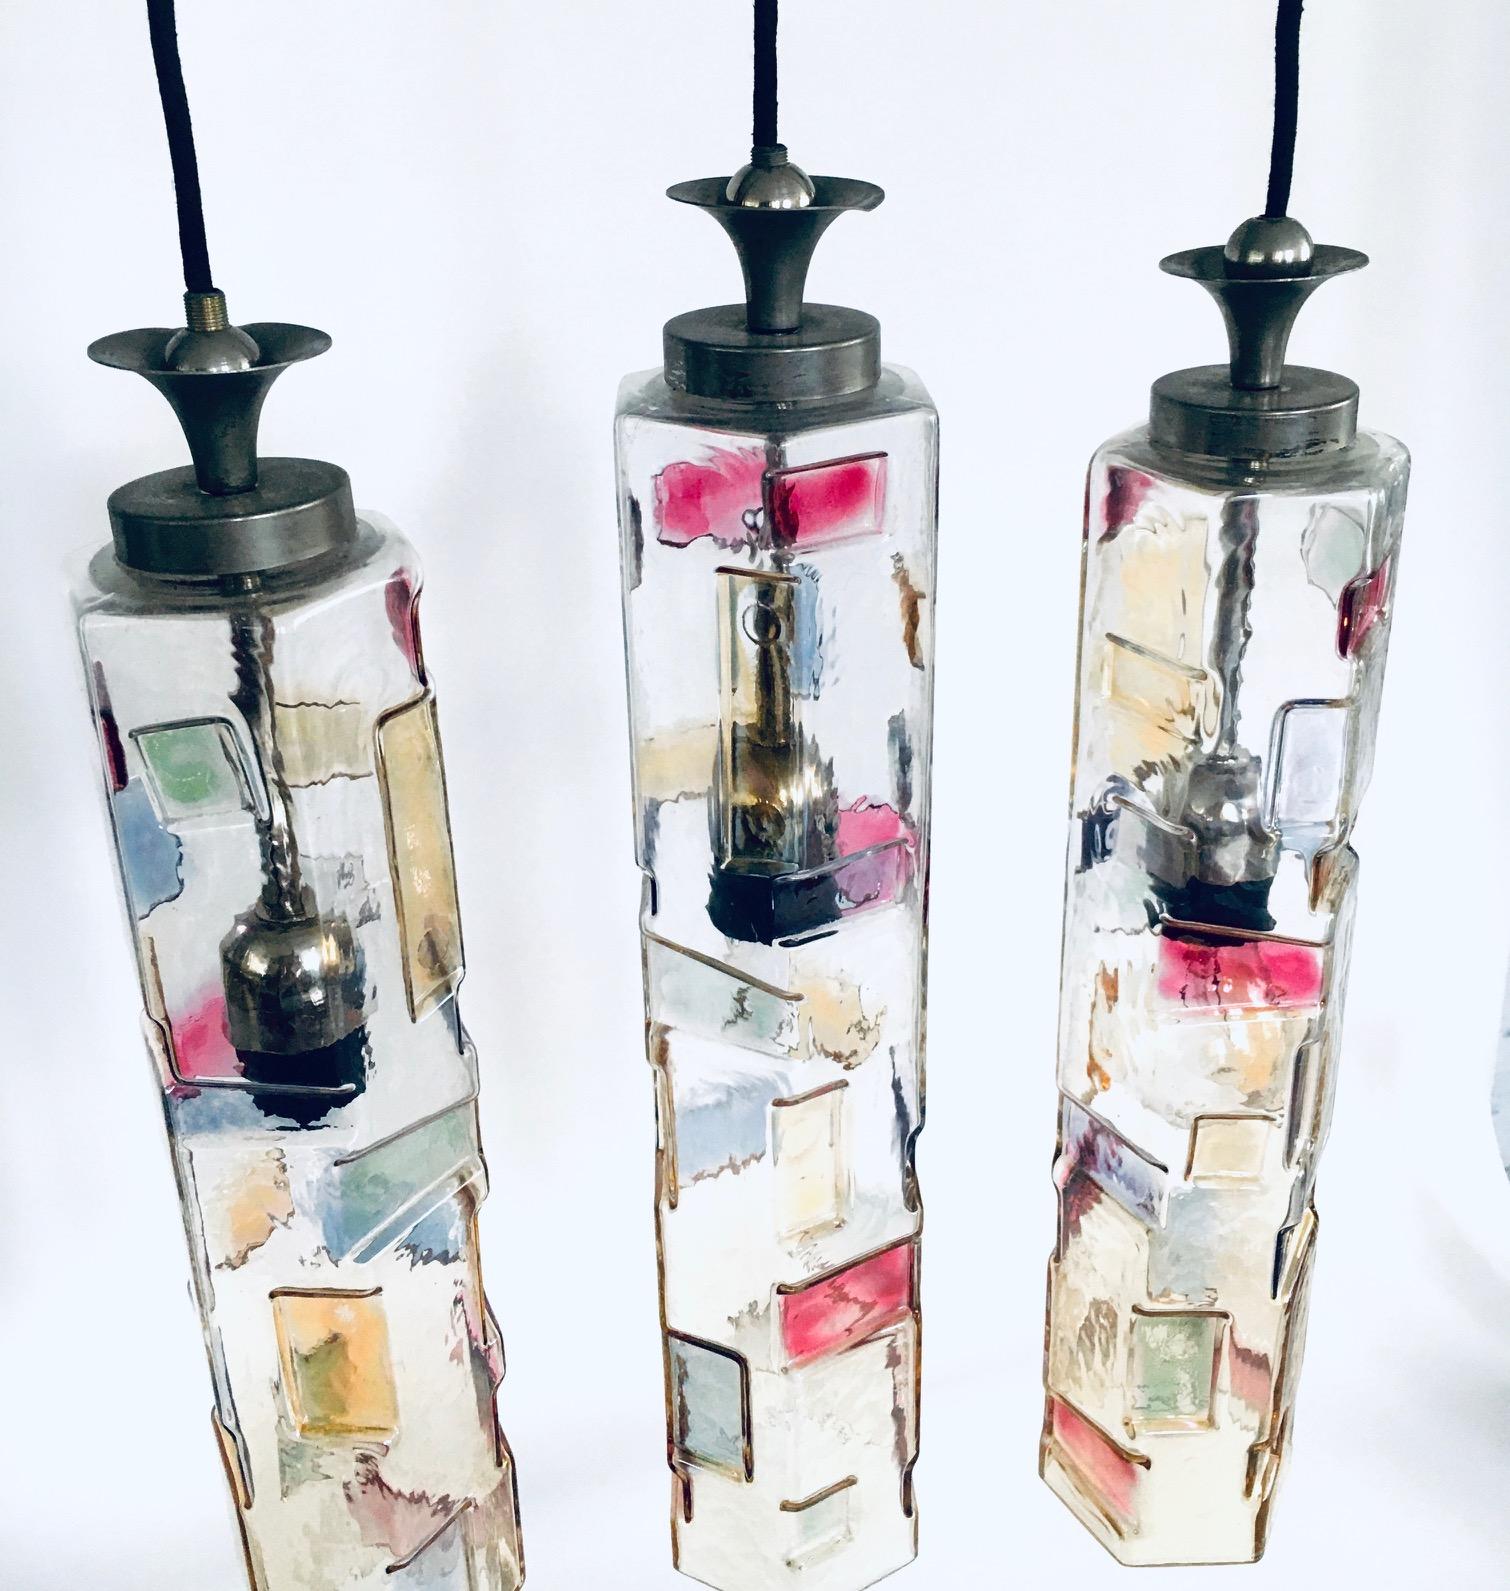 Poliarte Colored Glass Pendant Design Lamp Set, Italy 1950's For Sale 5